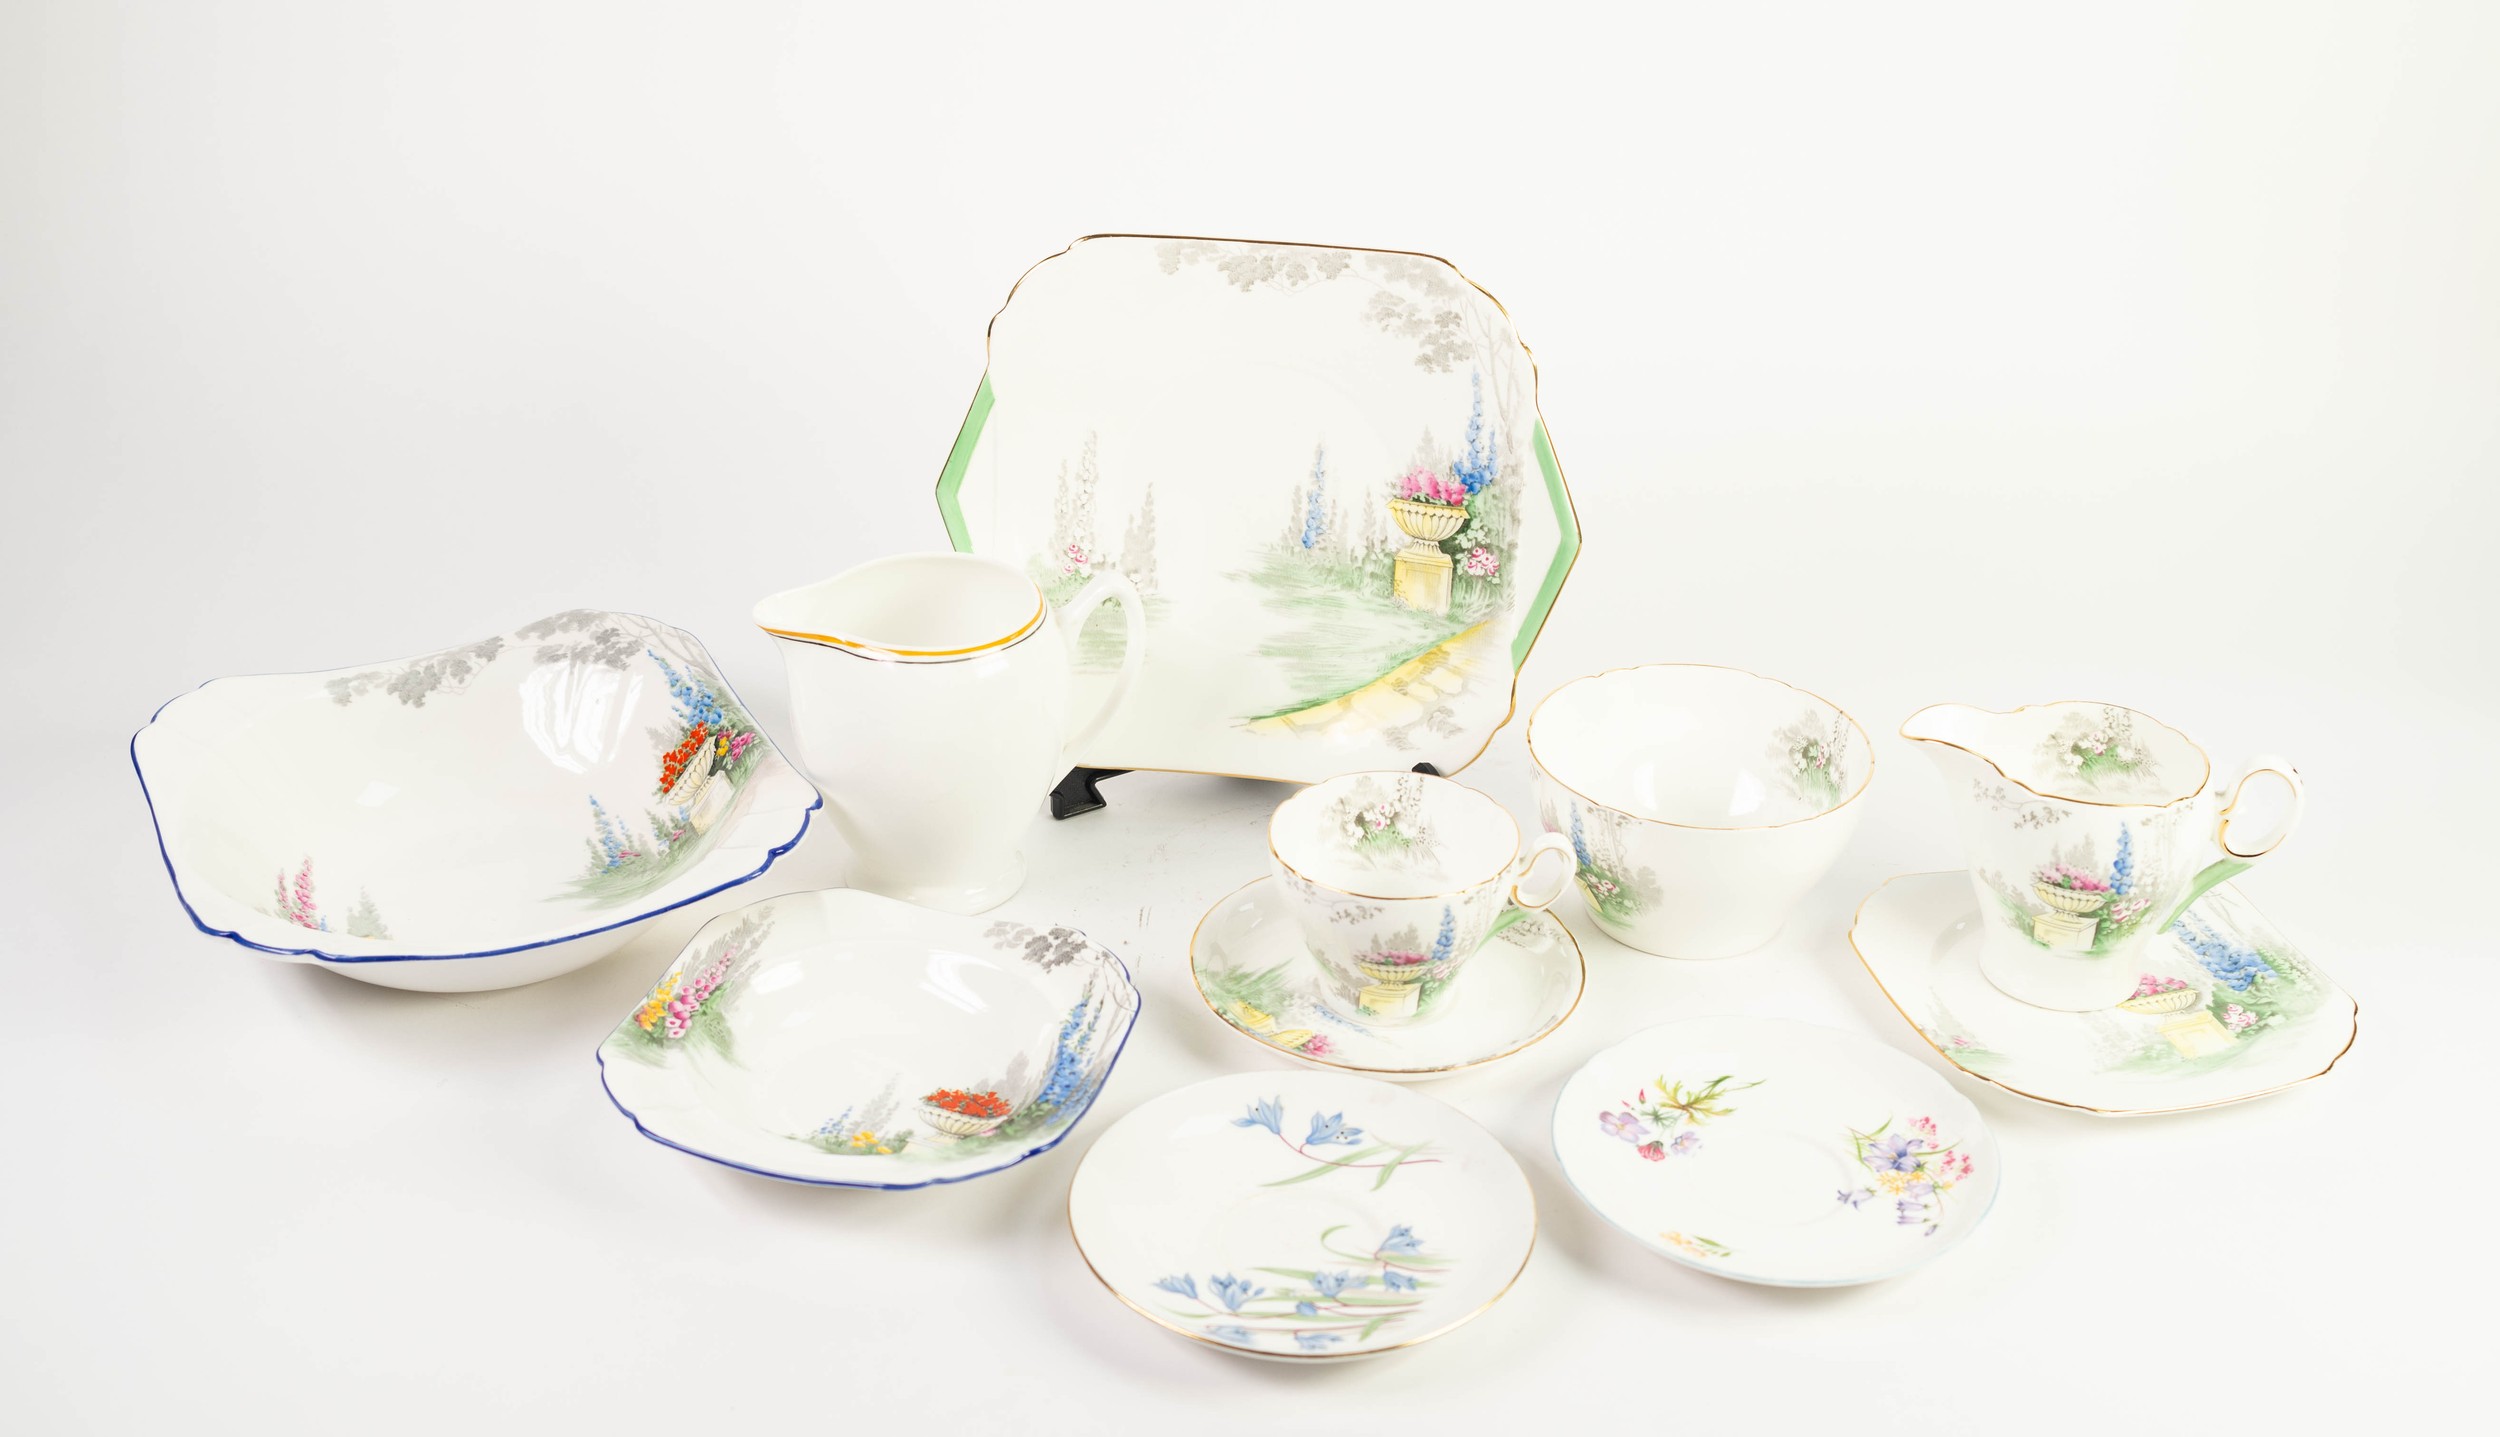 SHELLEY FORMAL GARDEN PATTERN CHINA TEA SET for six persons, including square side plates, a cake